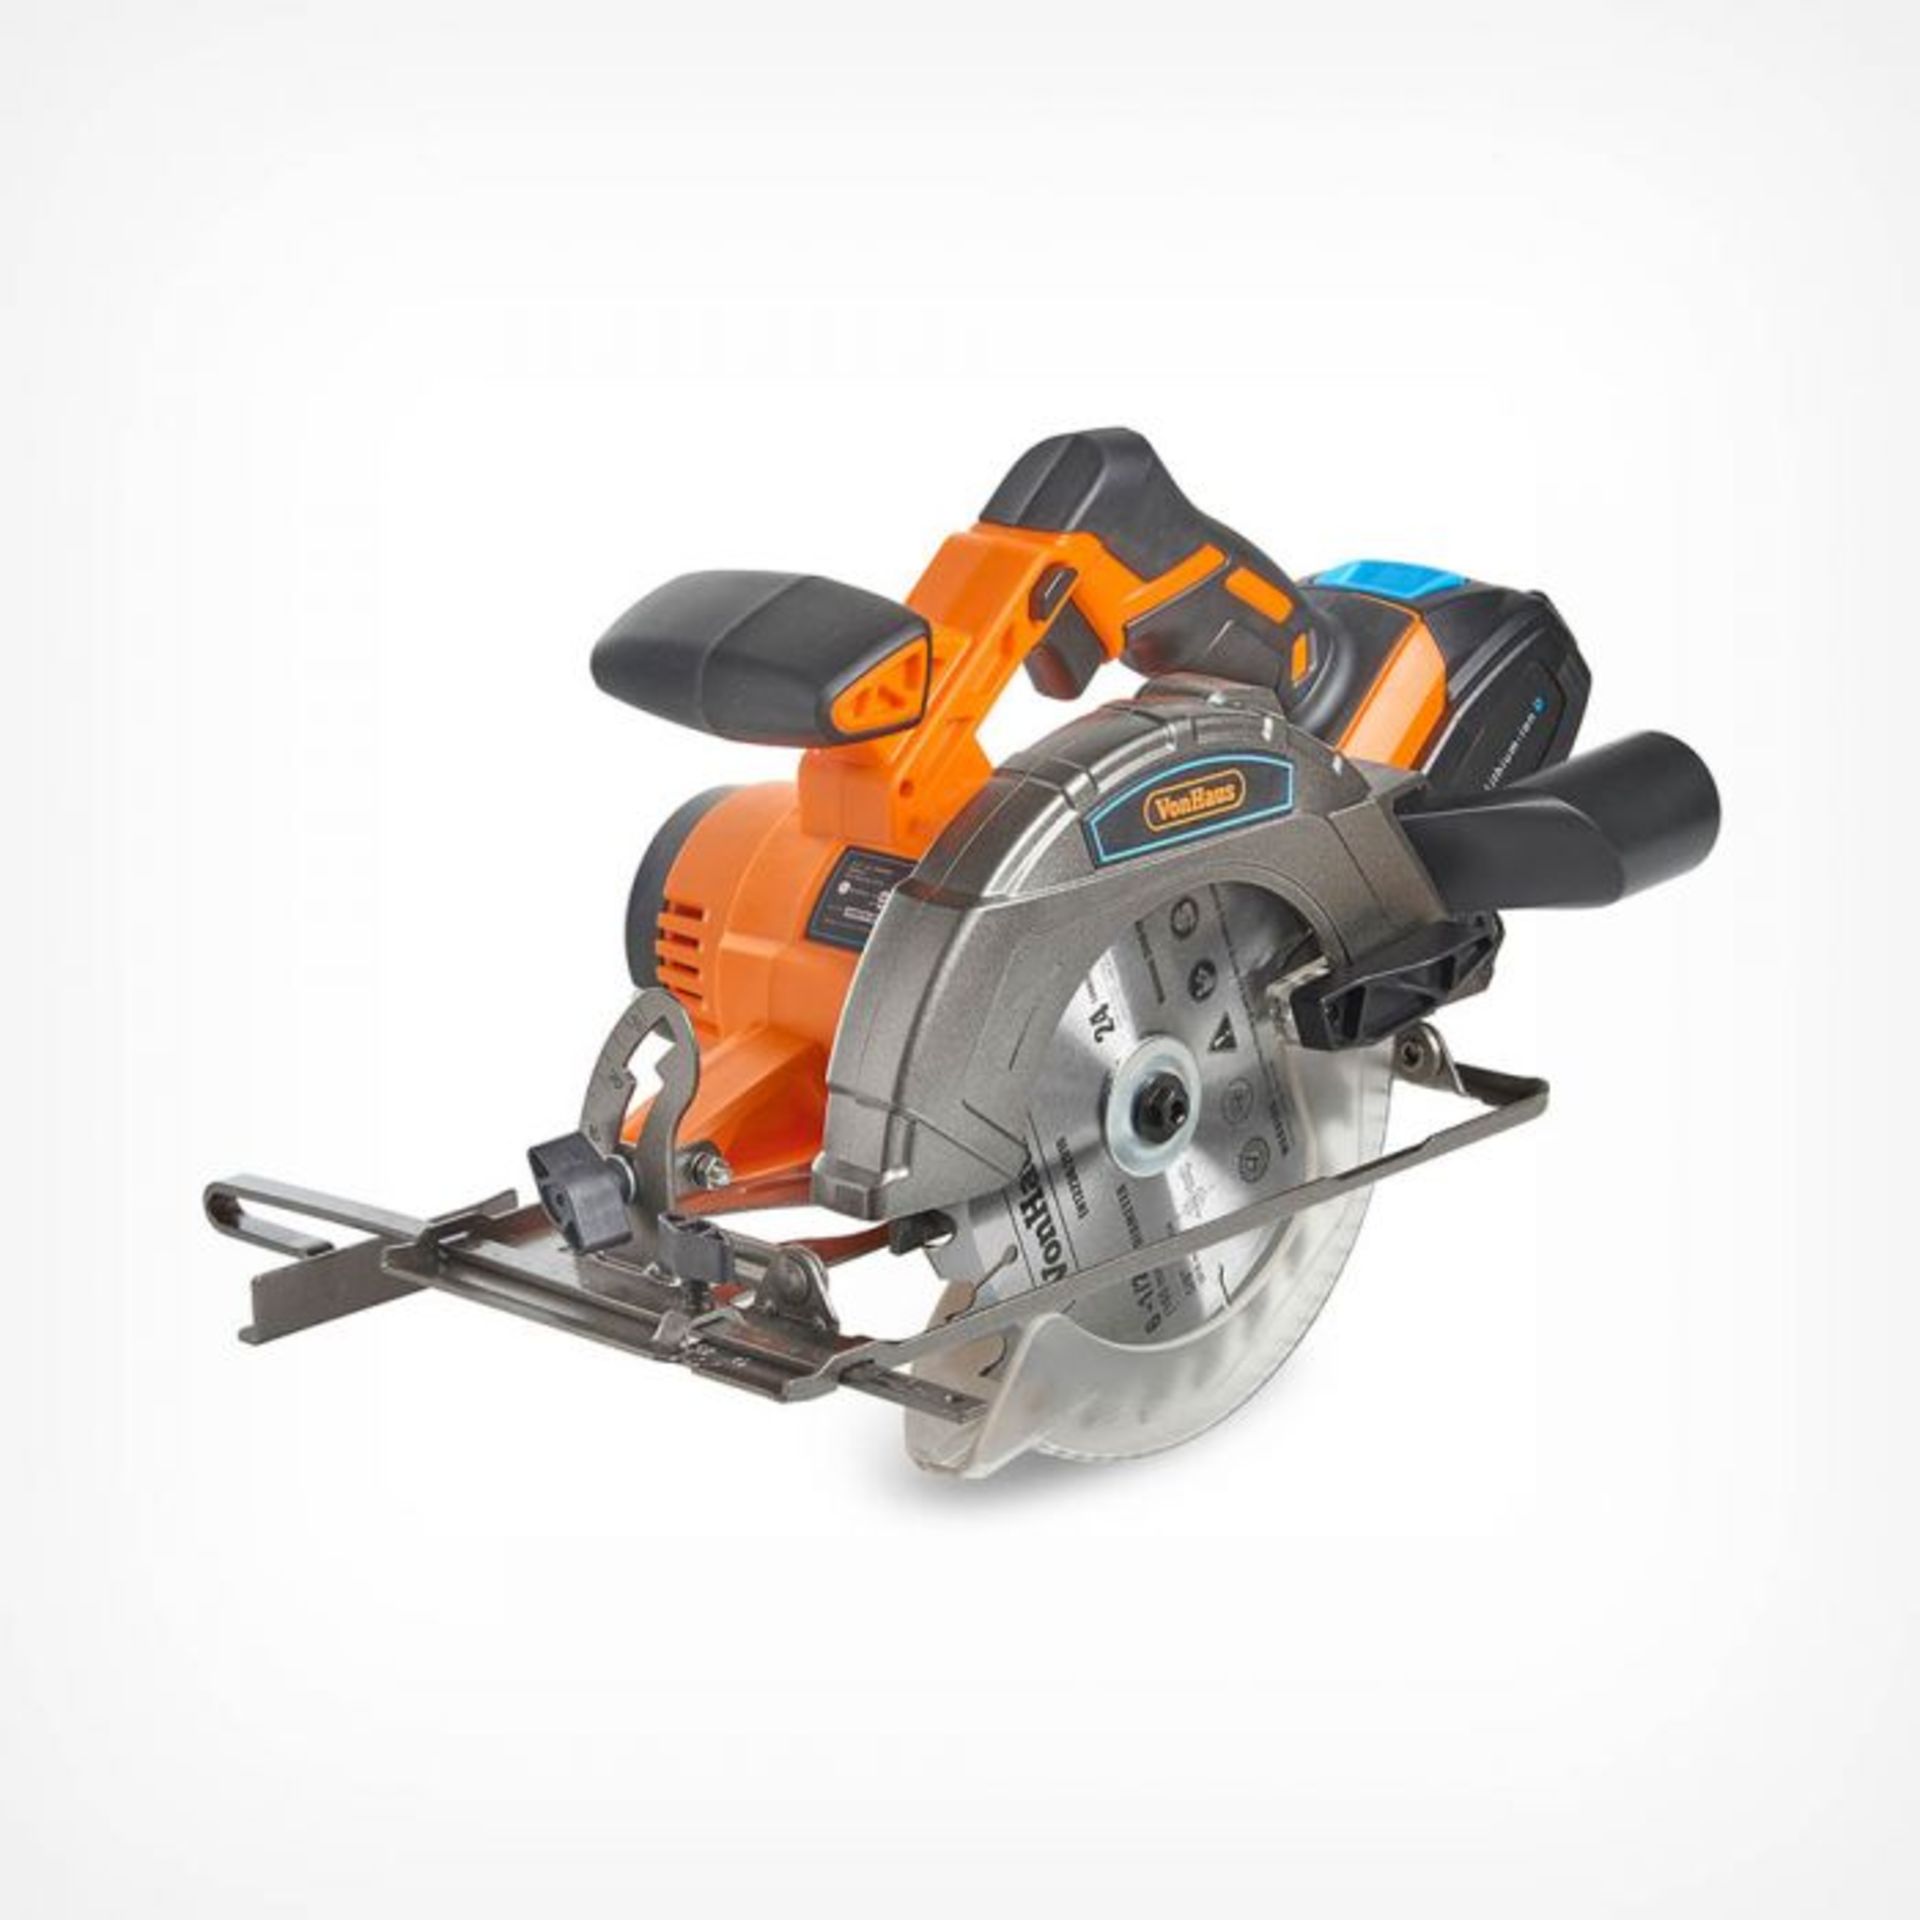 D-Series 20V Max Circular Saw. Whether you’re looking to add to your collection of tools from the